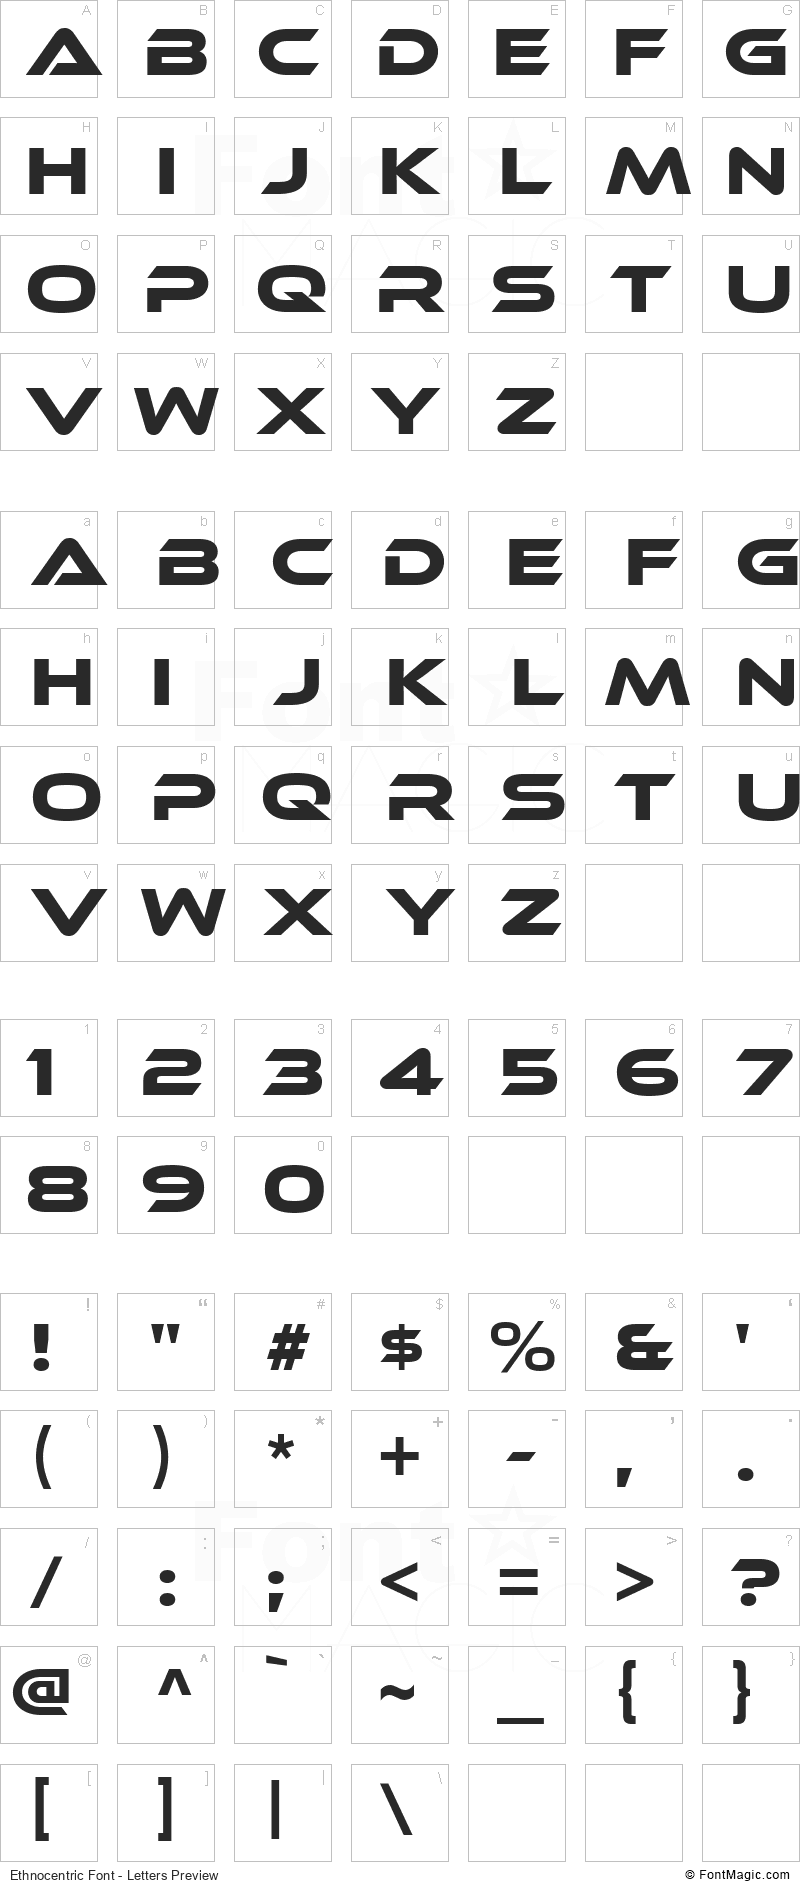 Ethnocentric Font - All Latters Preview Chart